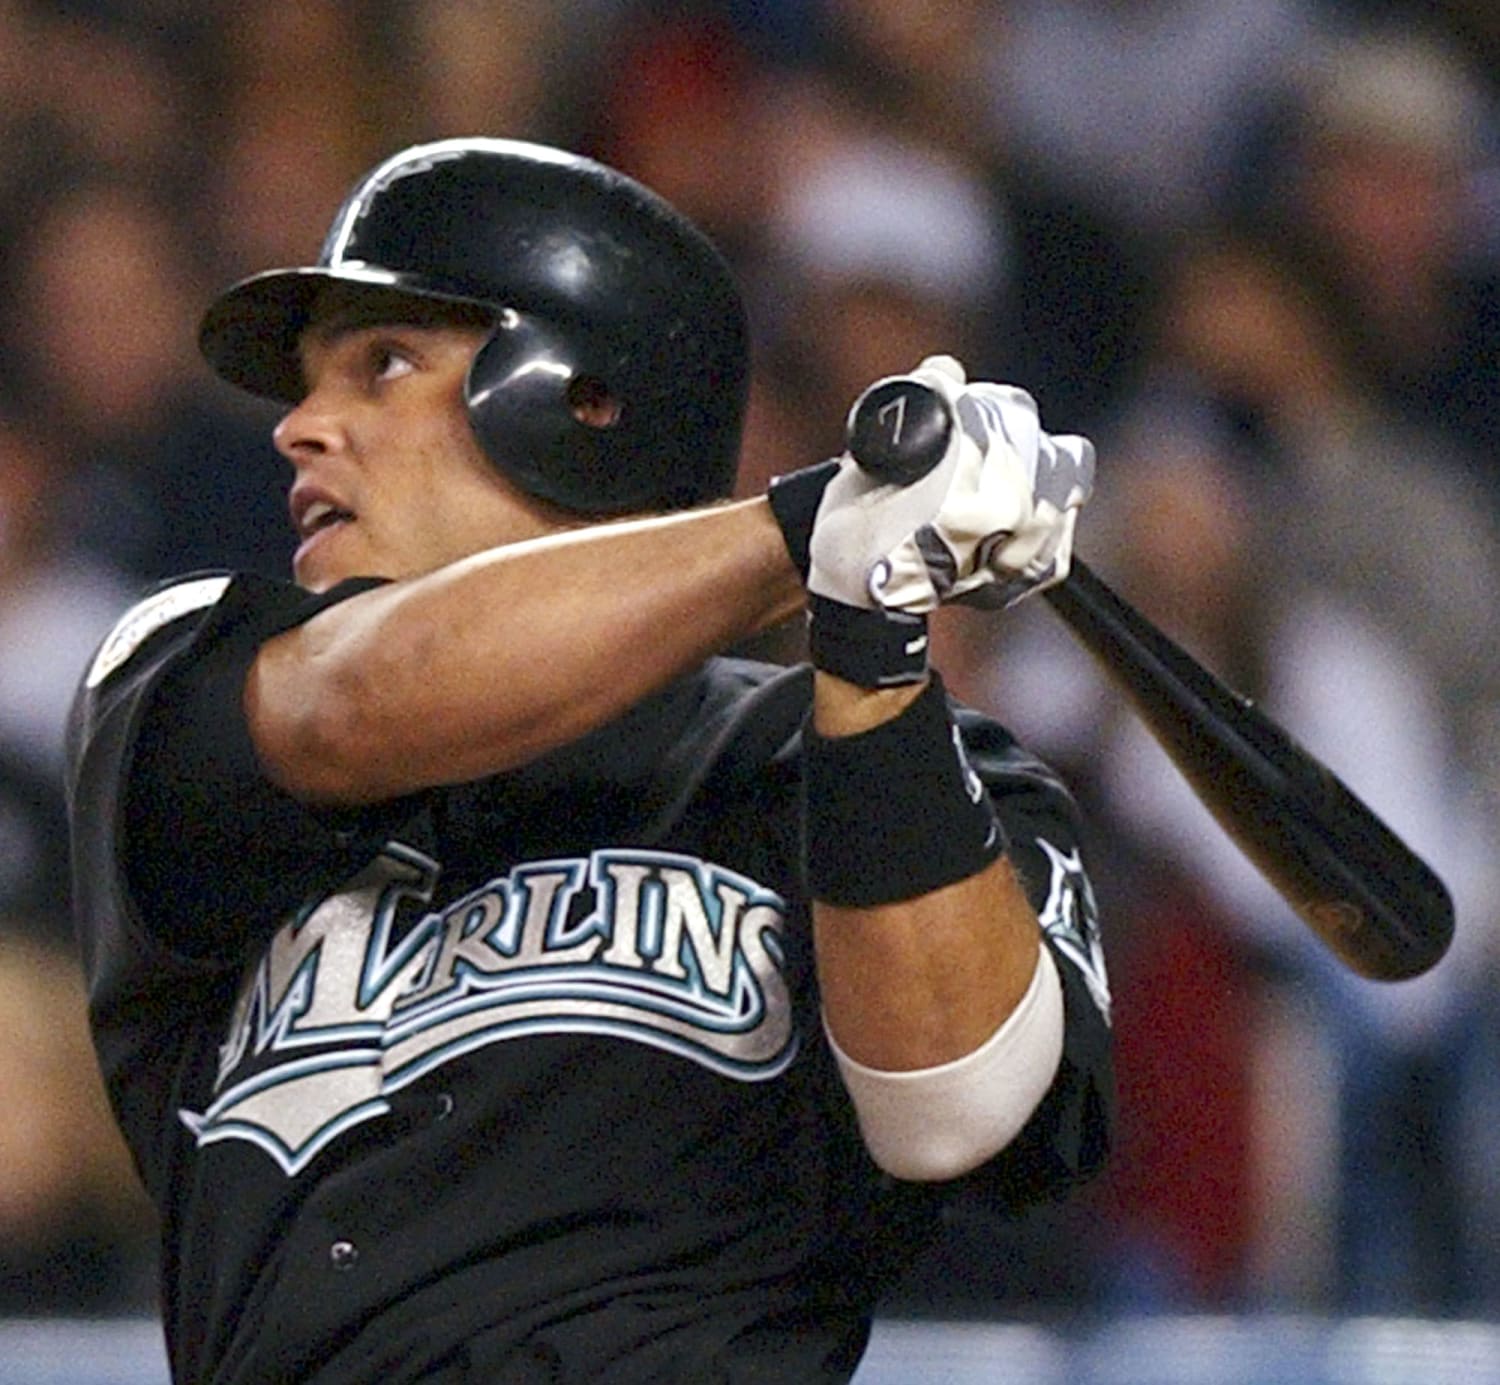 Ivan 'Pudge' Rodriguez Elected To Latino Baseball Hall Of Fame